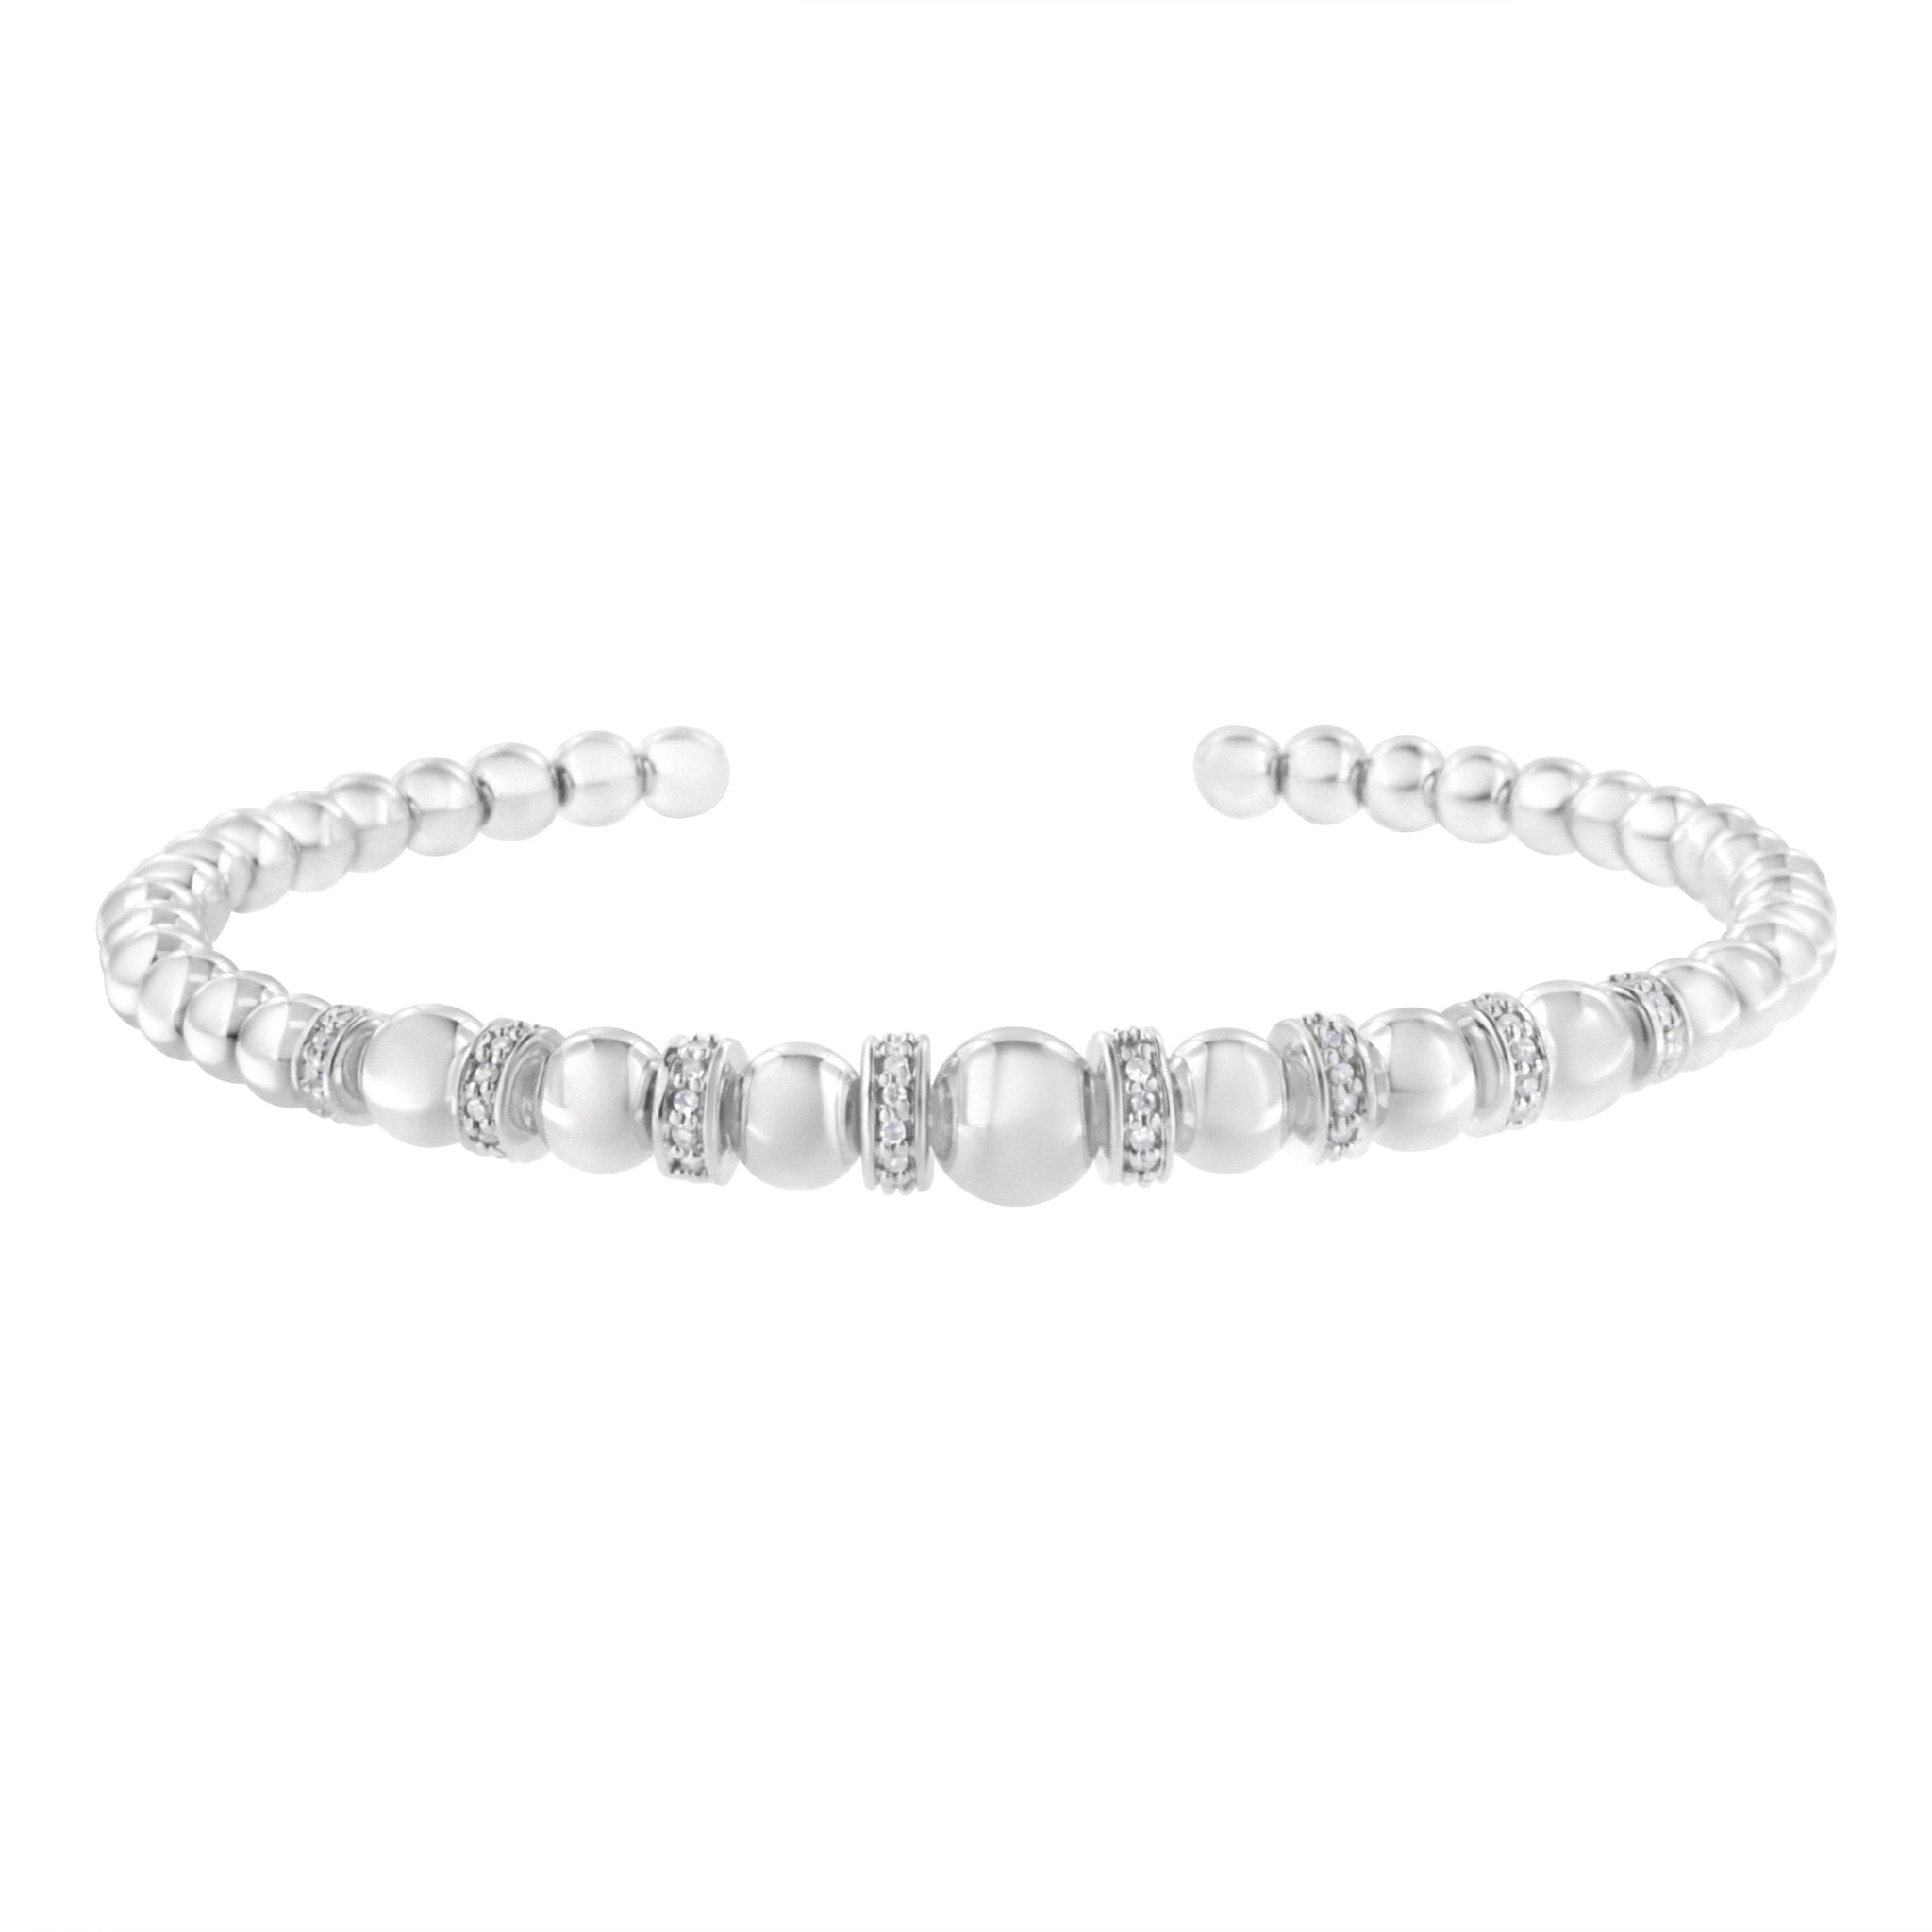 .925-Sterling-Silver-1/4-Cttw-Diamond-Rondelle-Graduated-Ball-Bead-Cuff-Bangle-Bracelet-(I-J-Color,-I2-I3-Clarity)-Fits-Wrists-Up-To-7-1/2-Inches-Bracelets